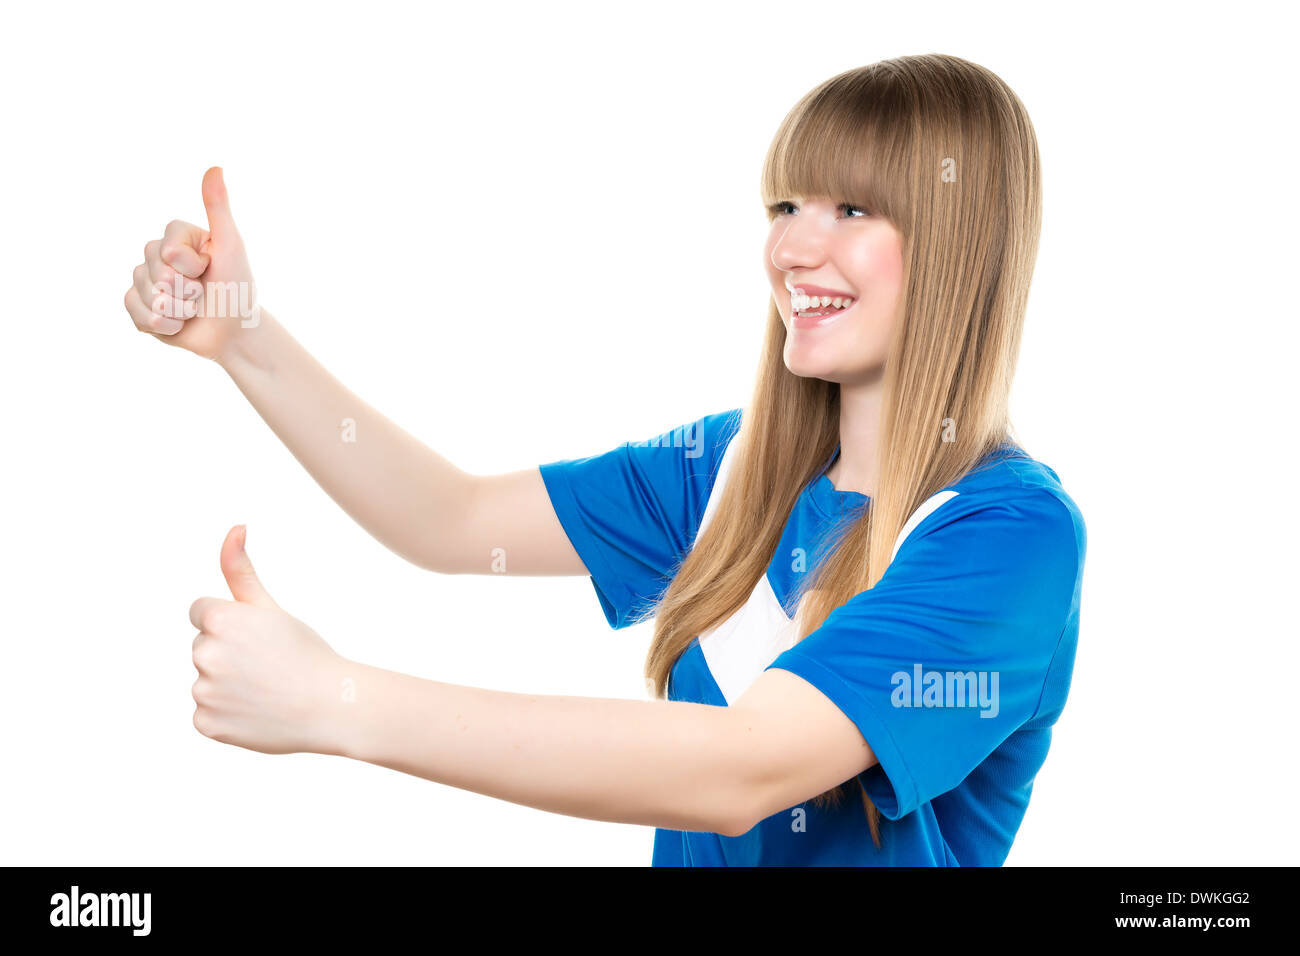 Happy girl in blue soccer shirt is holding her thumbs up Stock Photo